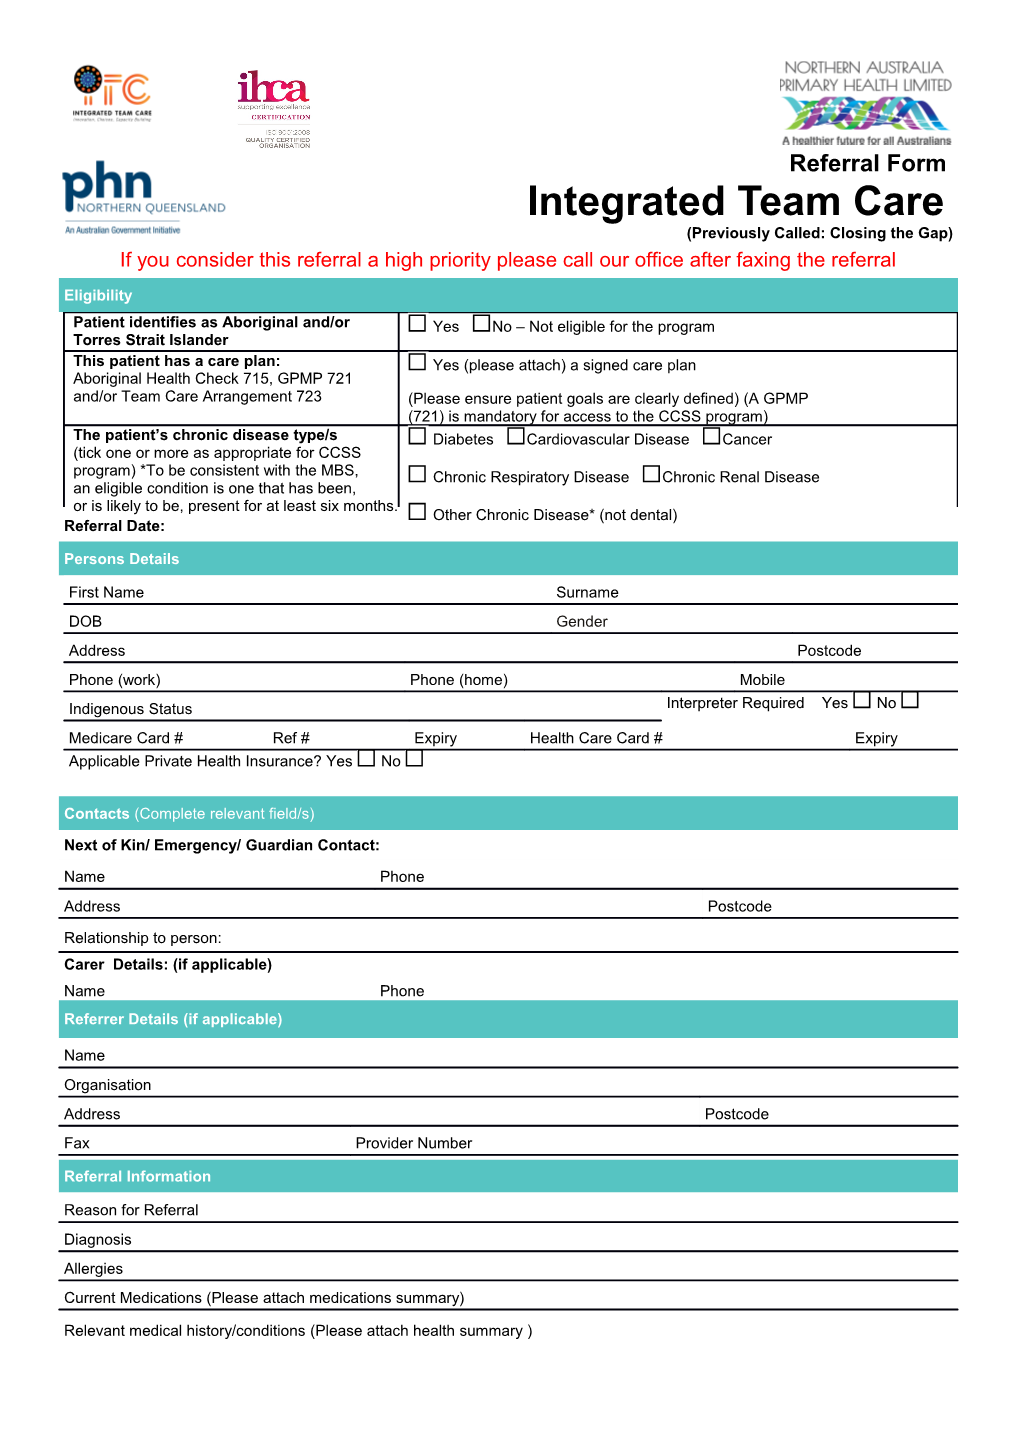 Referral Form Integrated Team Care